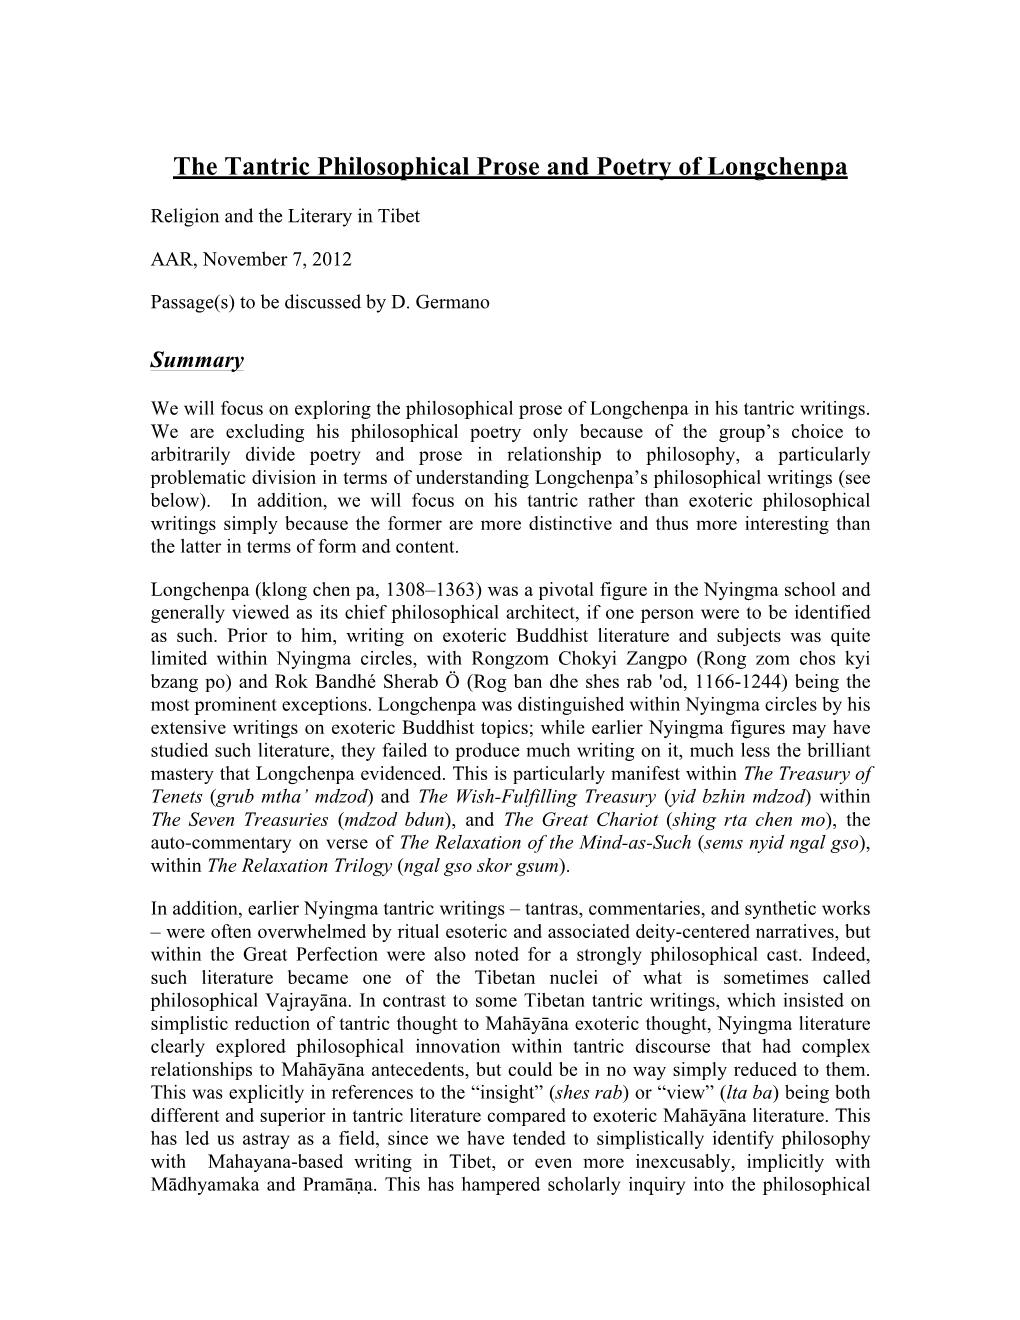 The Tantric Philosophical Prose and Poetry of Longchenpa